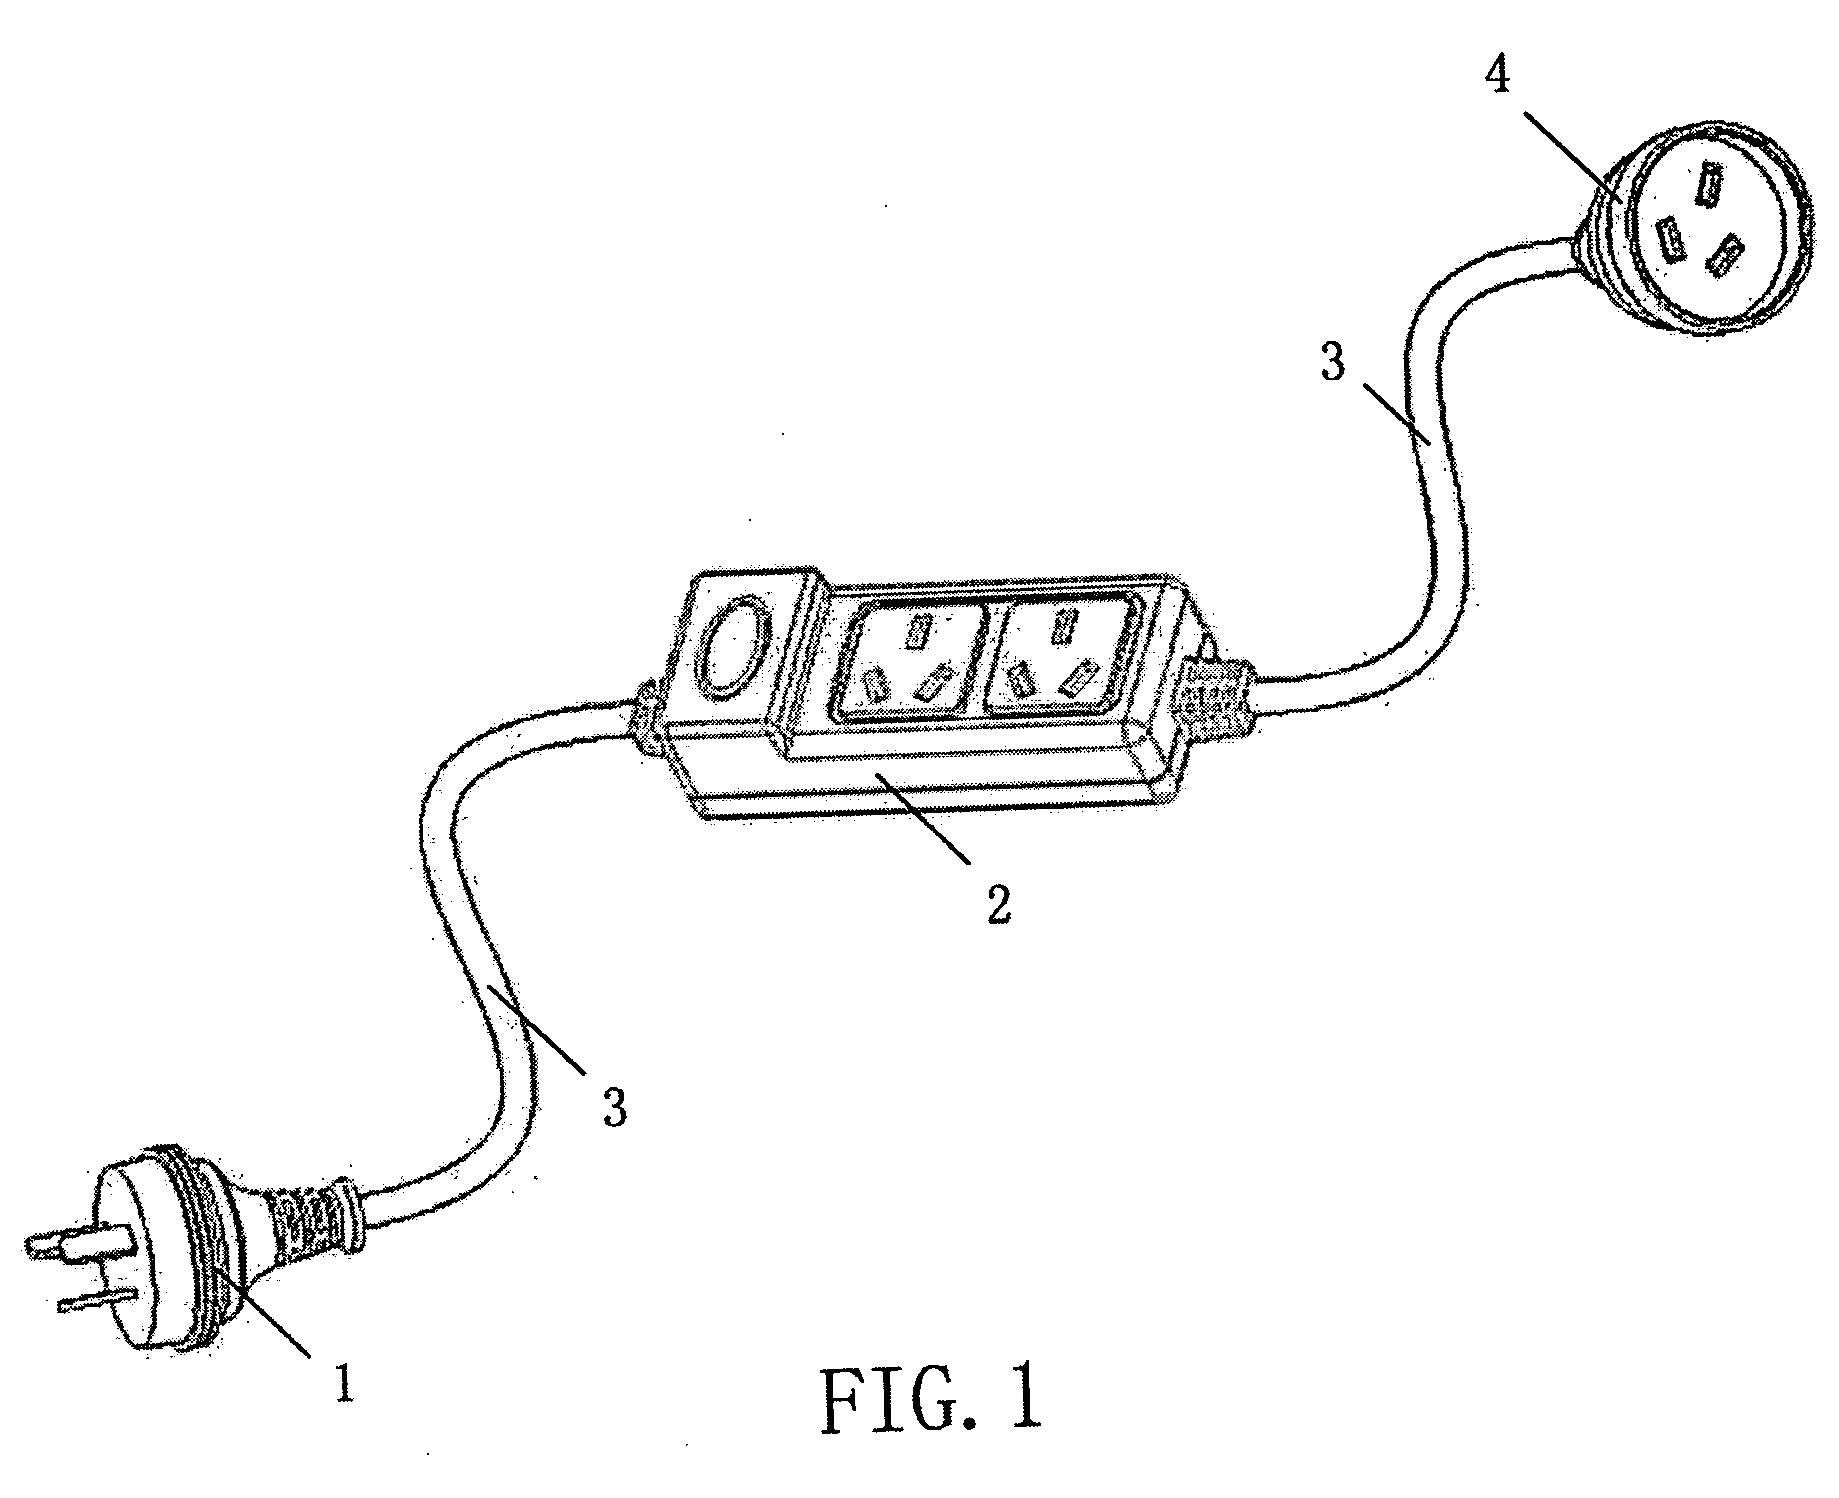 Extension cord and method of manufacturing the same